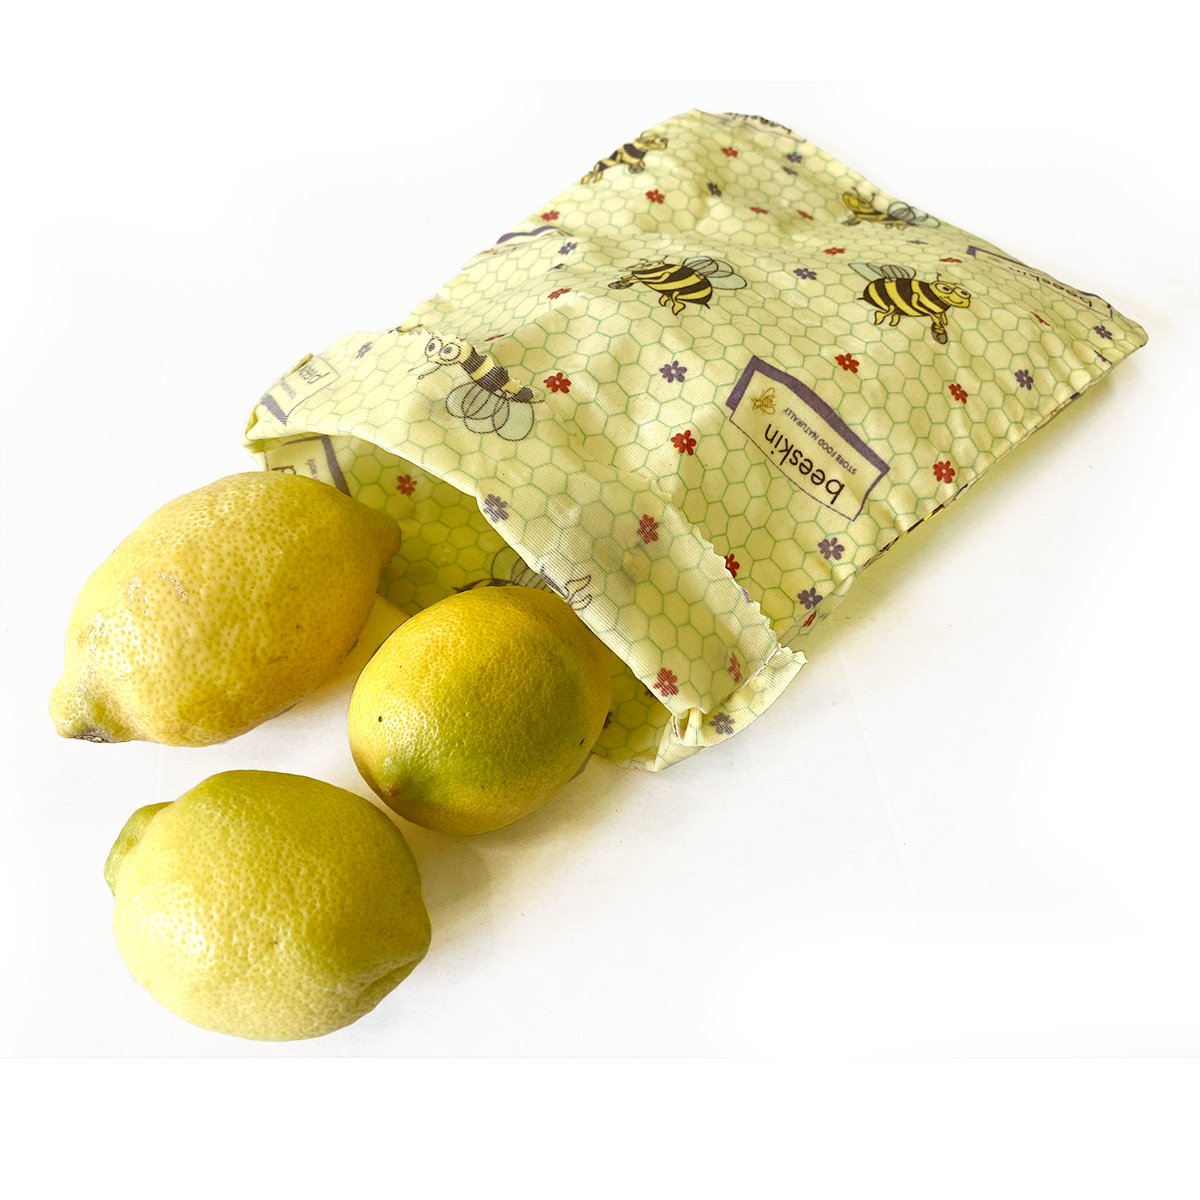 beeskin beeswax bag size s in kids design. shown with lemons